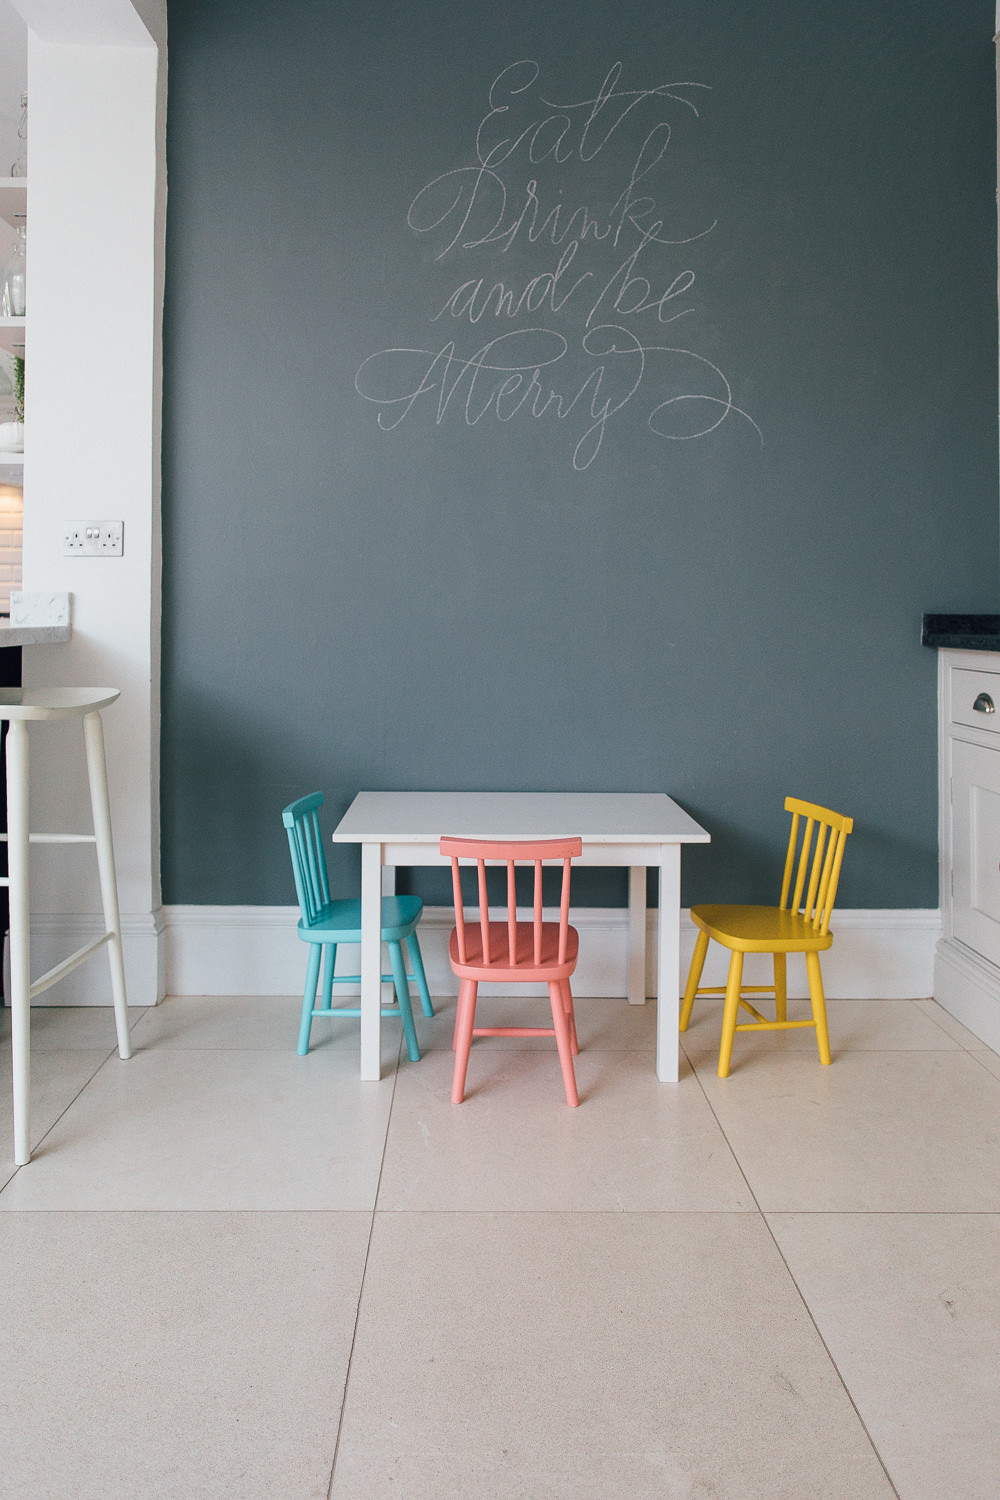 Chalkboard wall and kids dining area